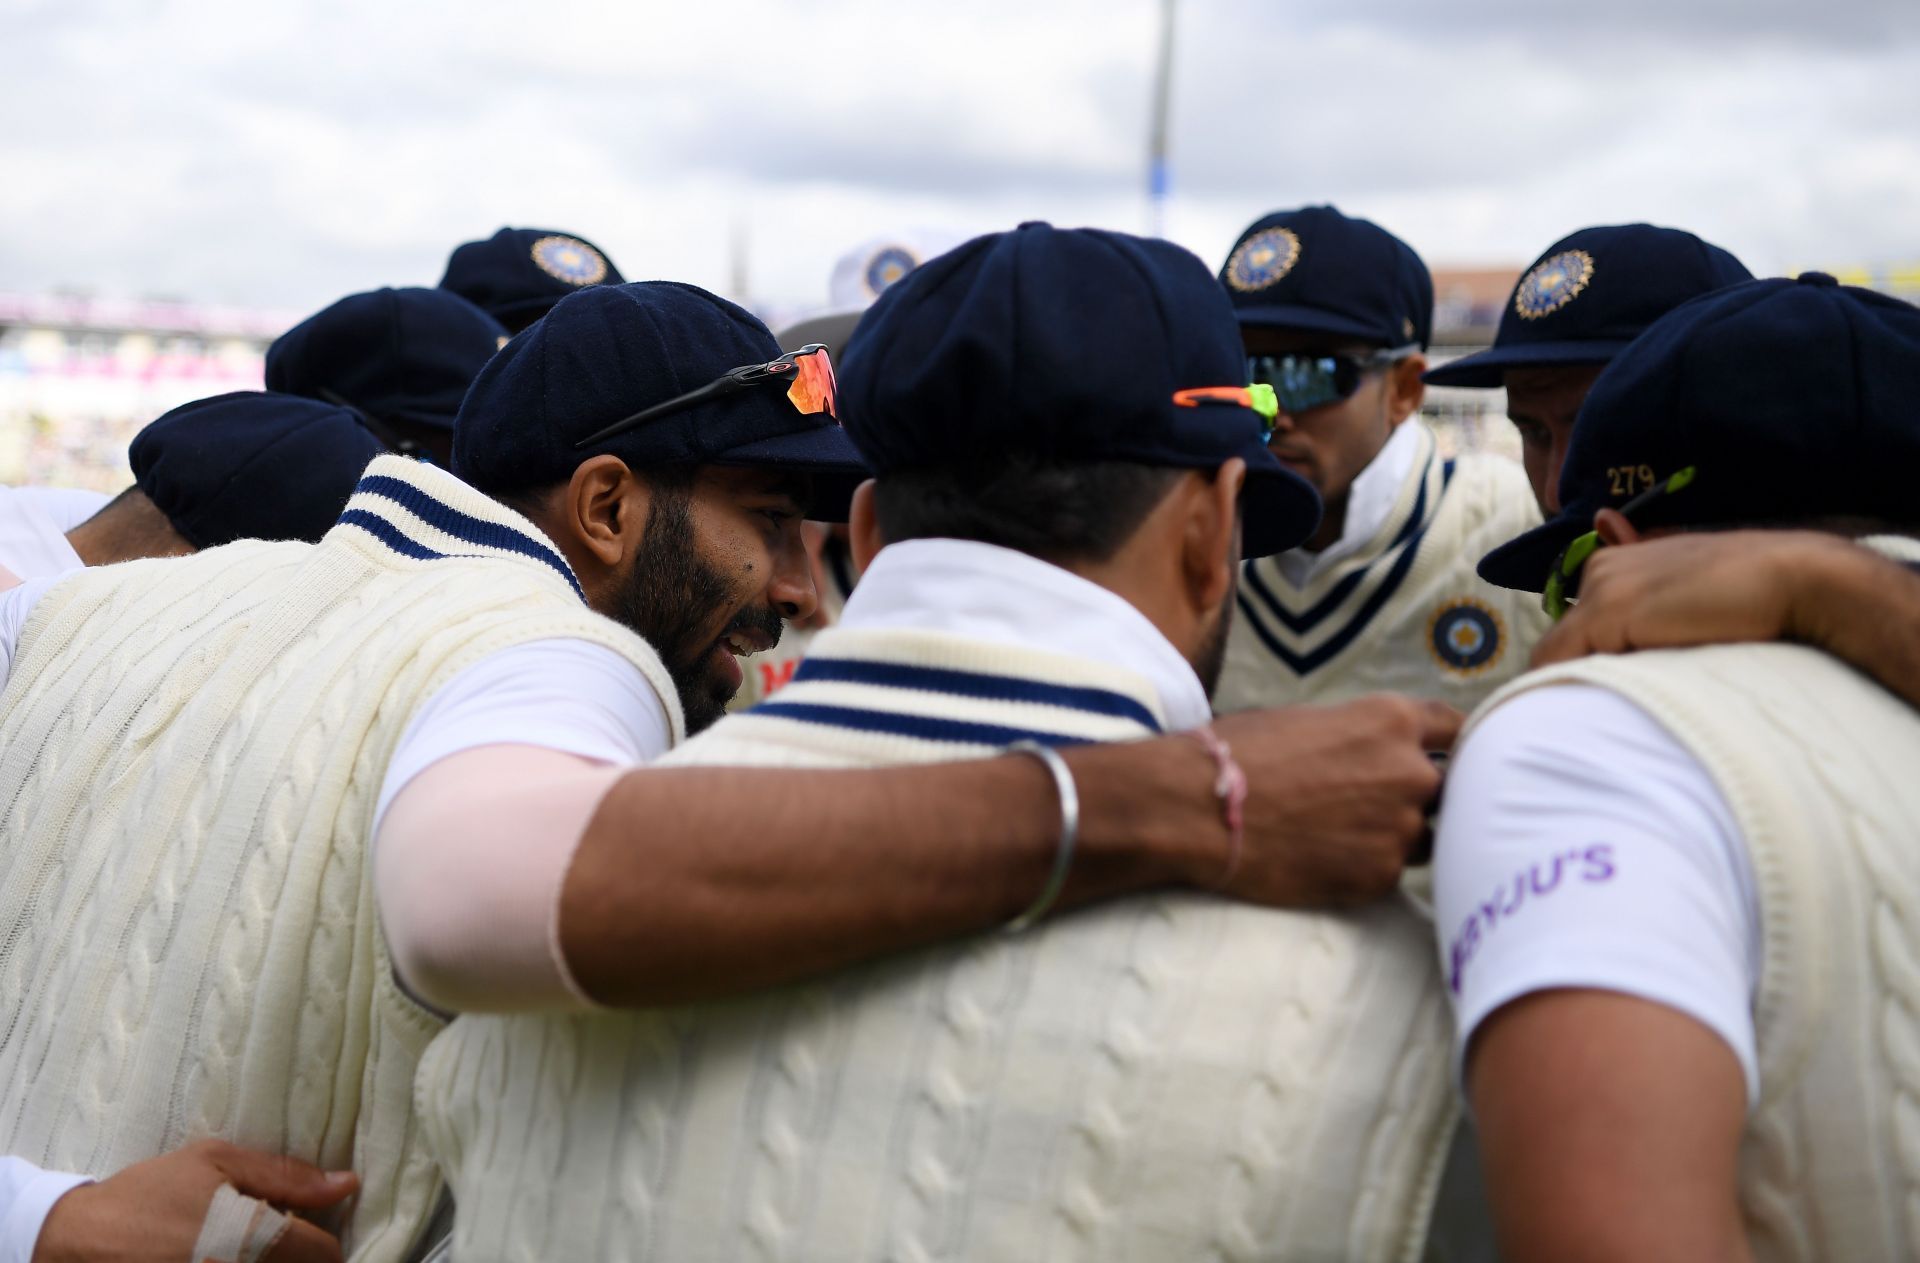 India would look to seal the series with a win in Edgbaston